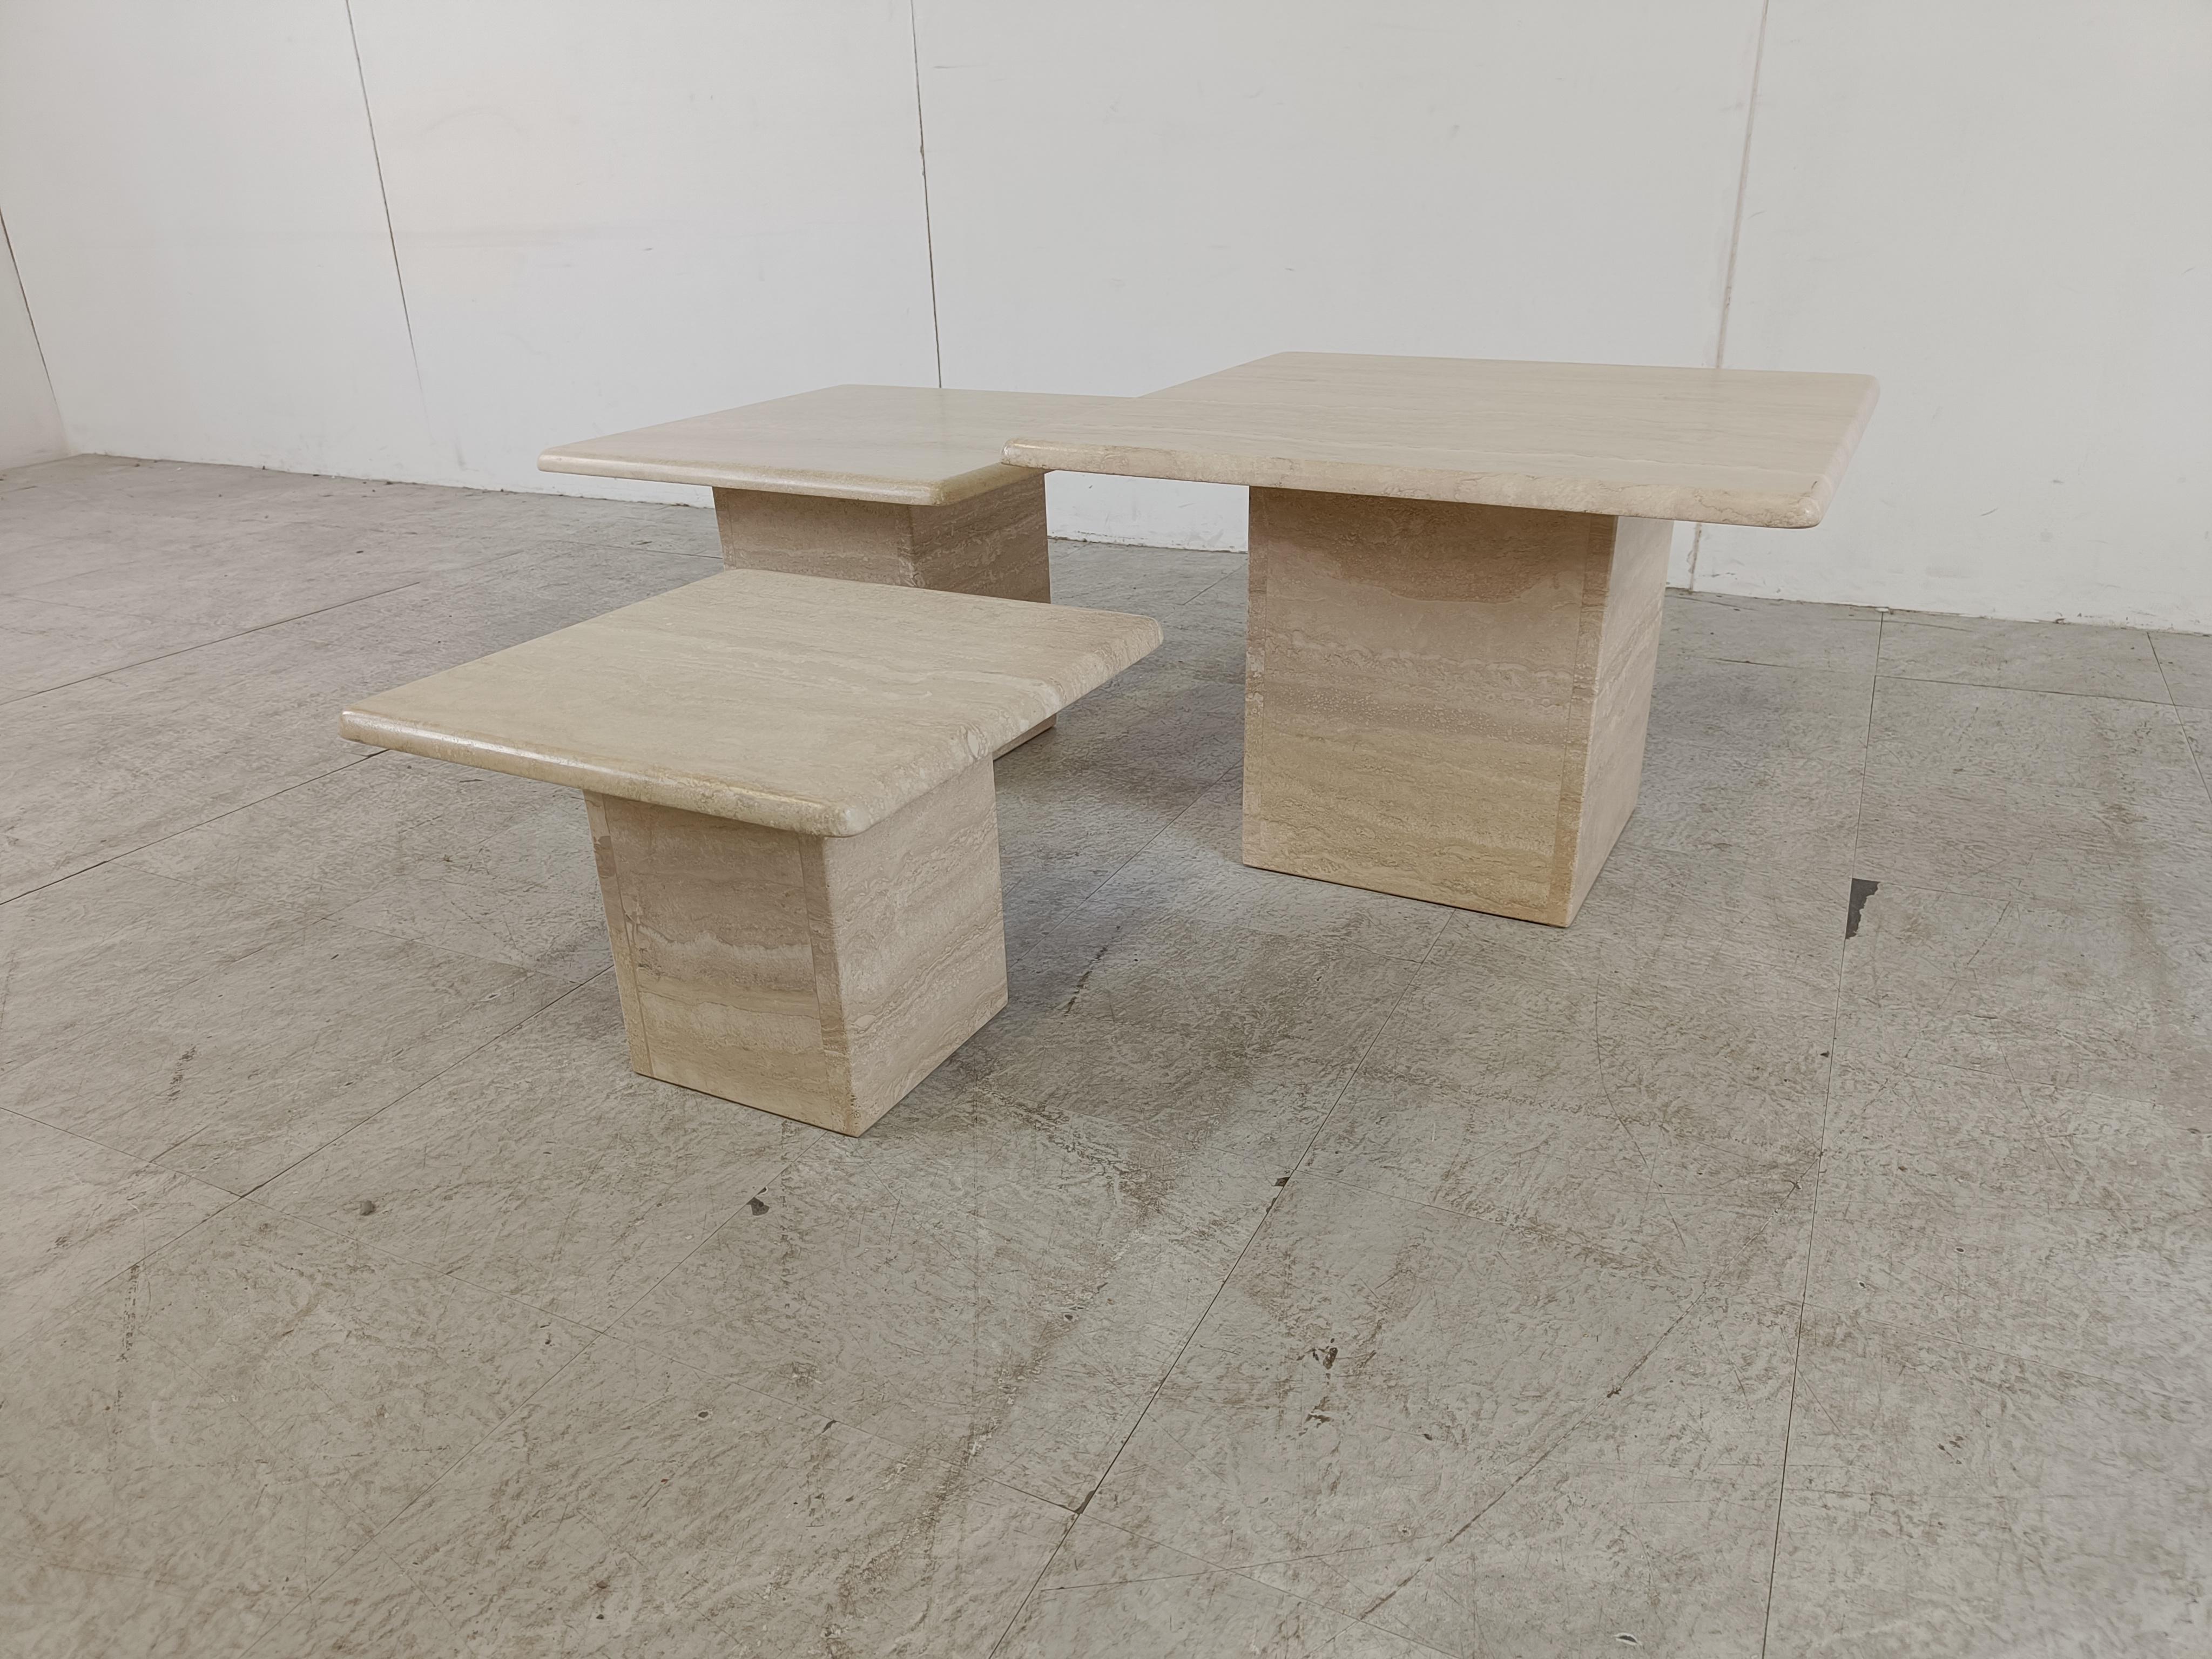 Set of 1970s italian travertine stone nesting tables or side tables.

The tables can be set up in different compositions. Timeless items.

Beautiful colour.

Good condition

1970s - italy

Dimensions:
Large table: 60*60*40 cm 
Medium table :